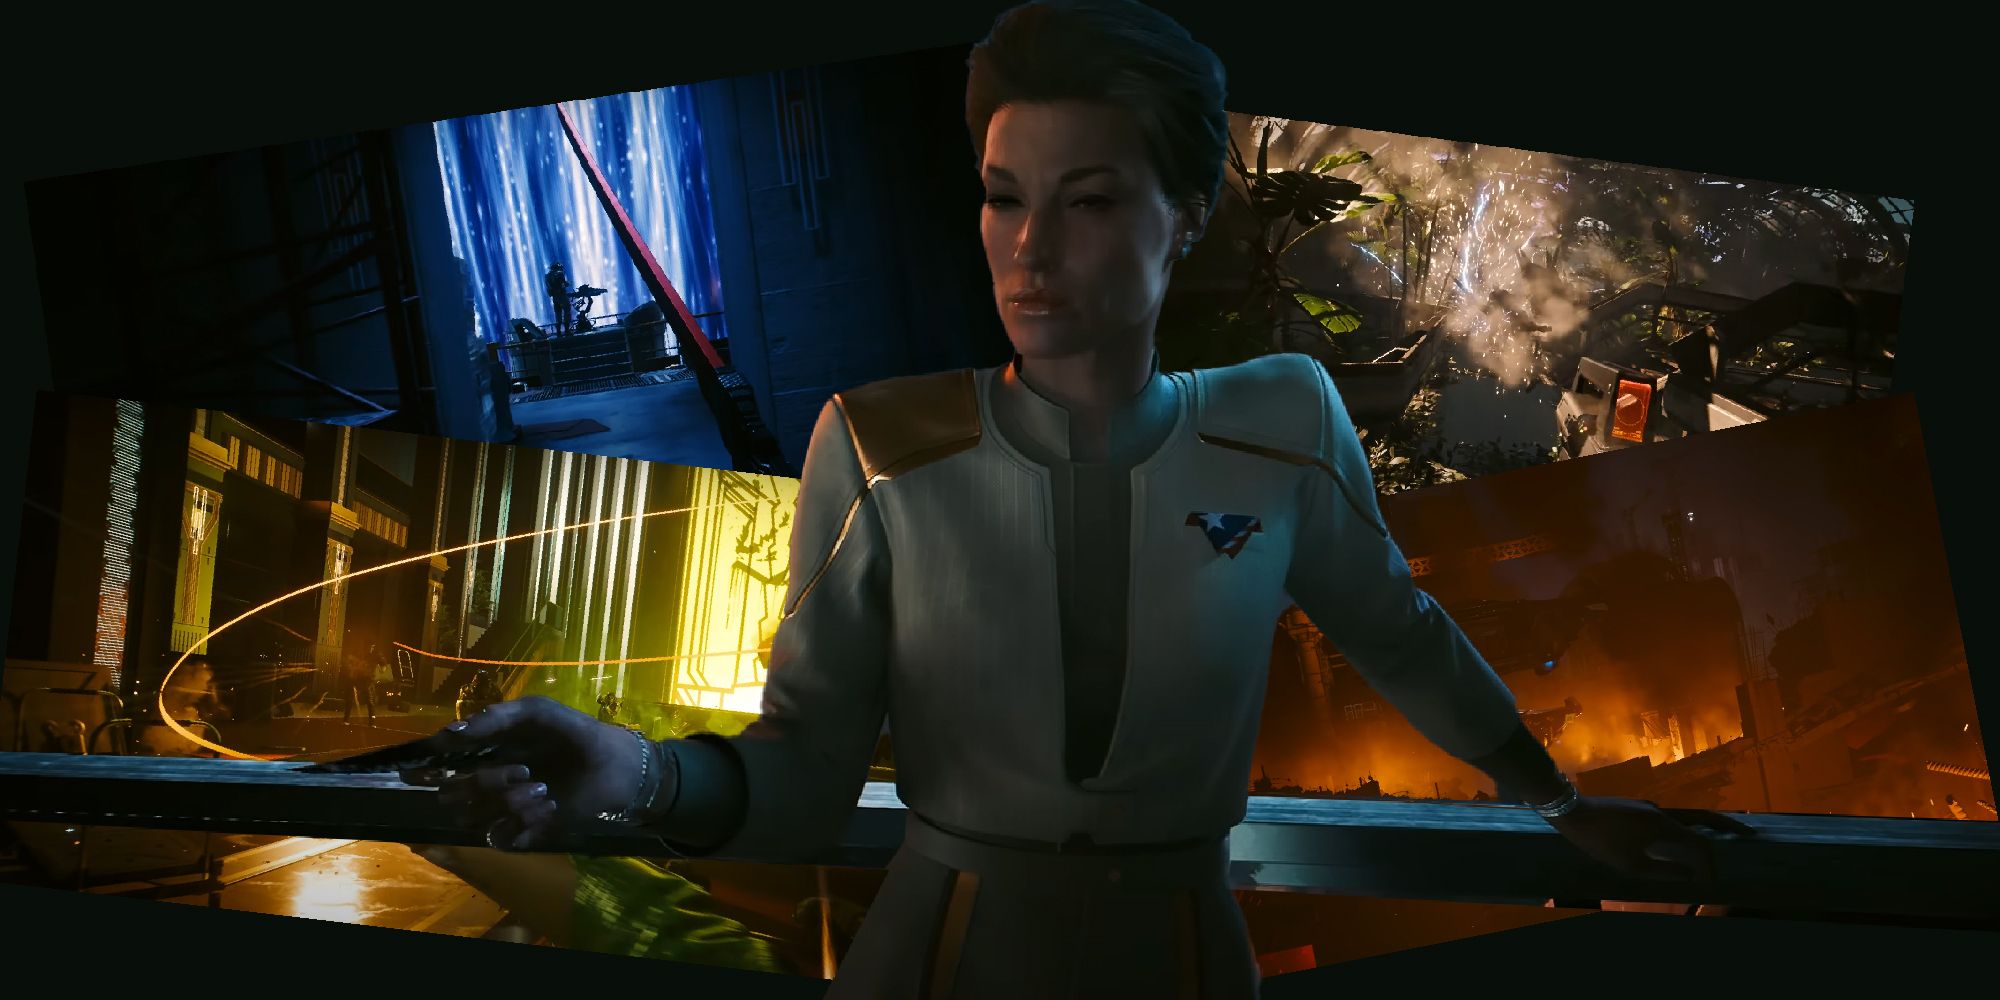 We’re Not Getting Any News About Cyberpunk 2077: Phantom Liberty Until June